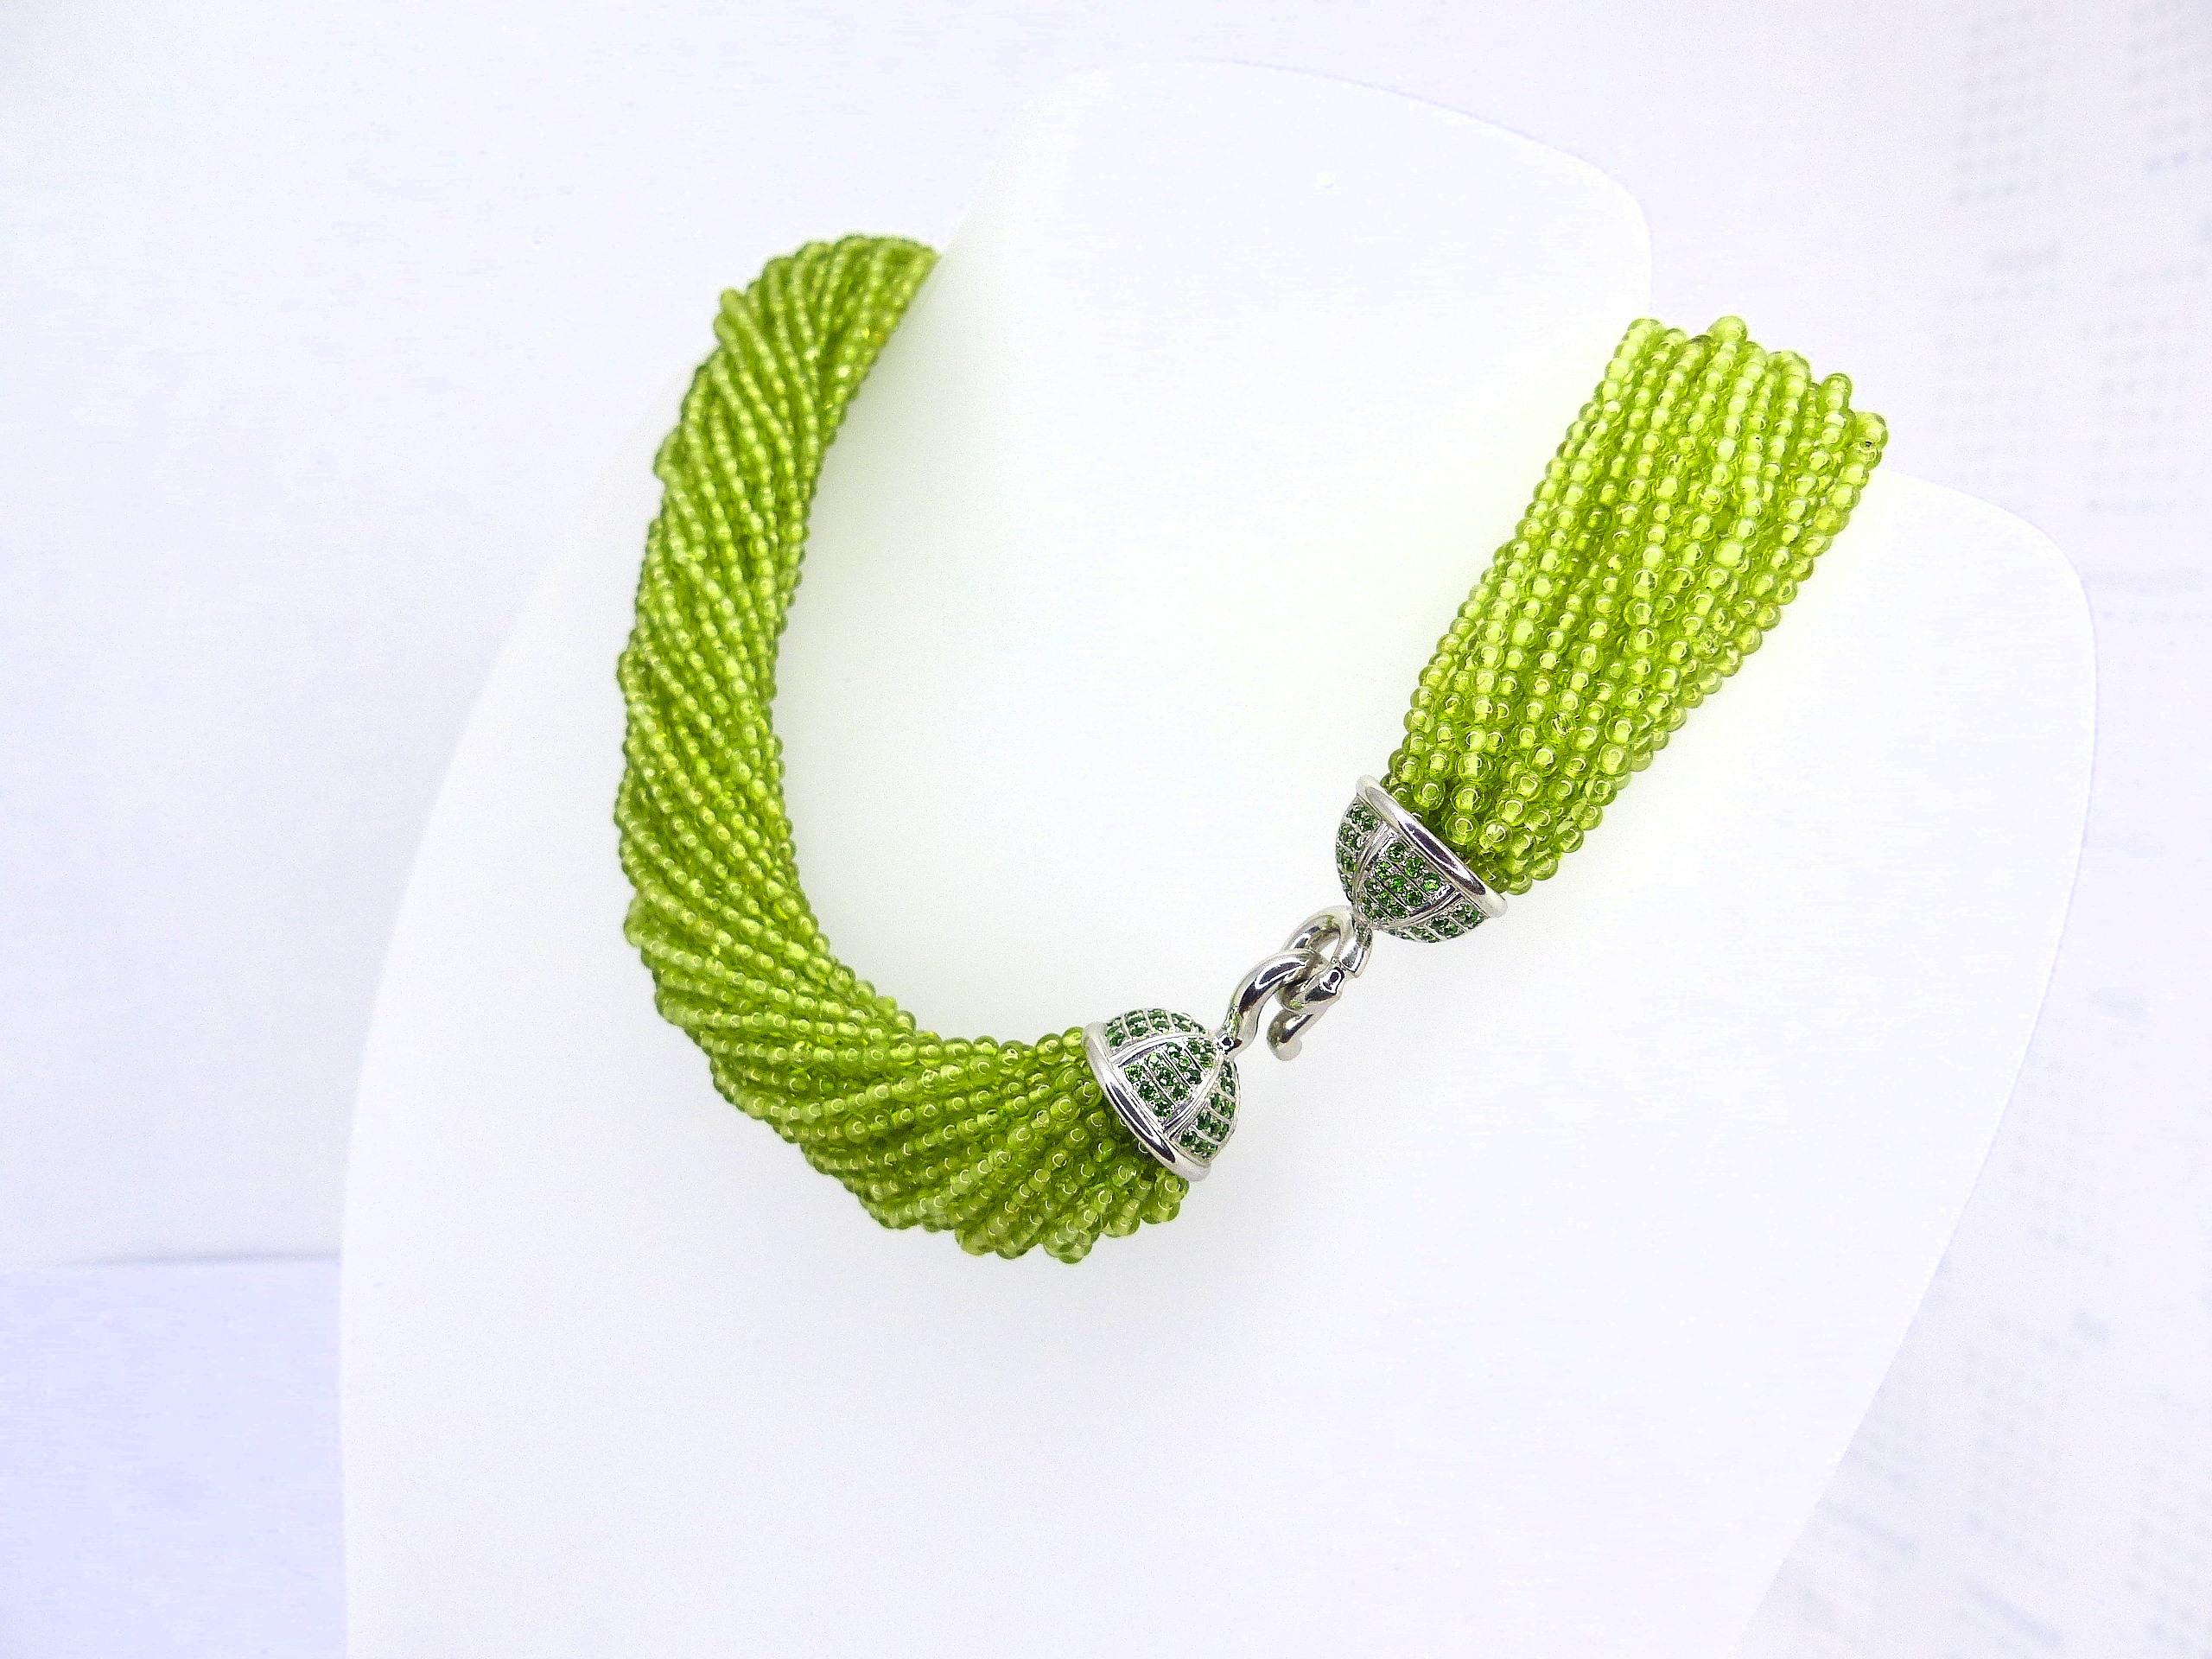 Thomas Leyser is renowned for his contemporary jewellery designs utilizing fine gemstones.

This necklace with 26x ropes with Peridot beads (2.5mm) with a 18k White Gold Clasp set with 144x fine Tsavorites (facetted, 1.5mm).

